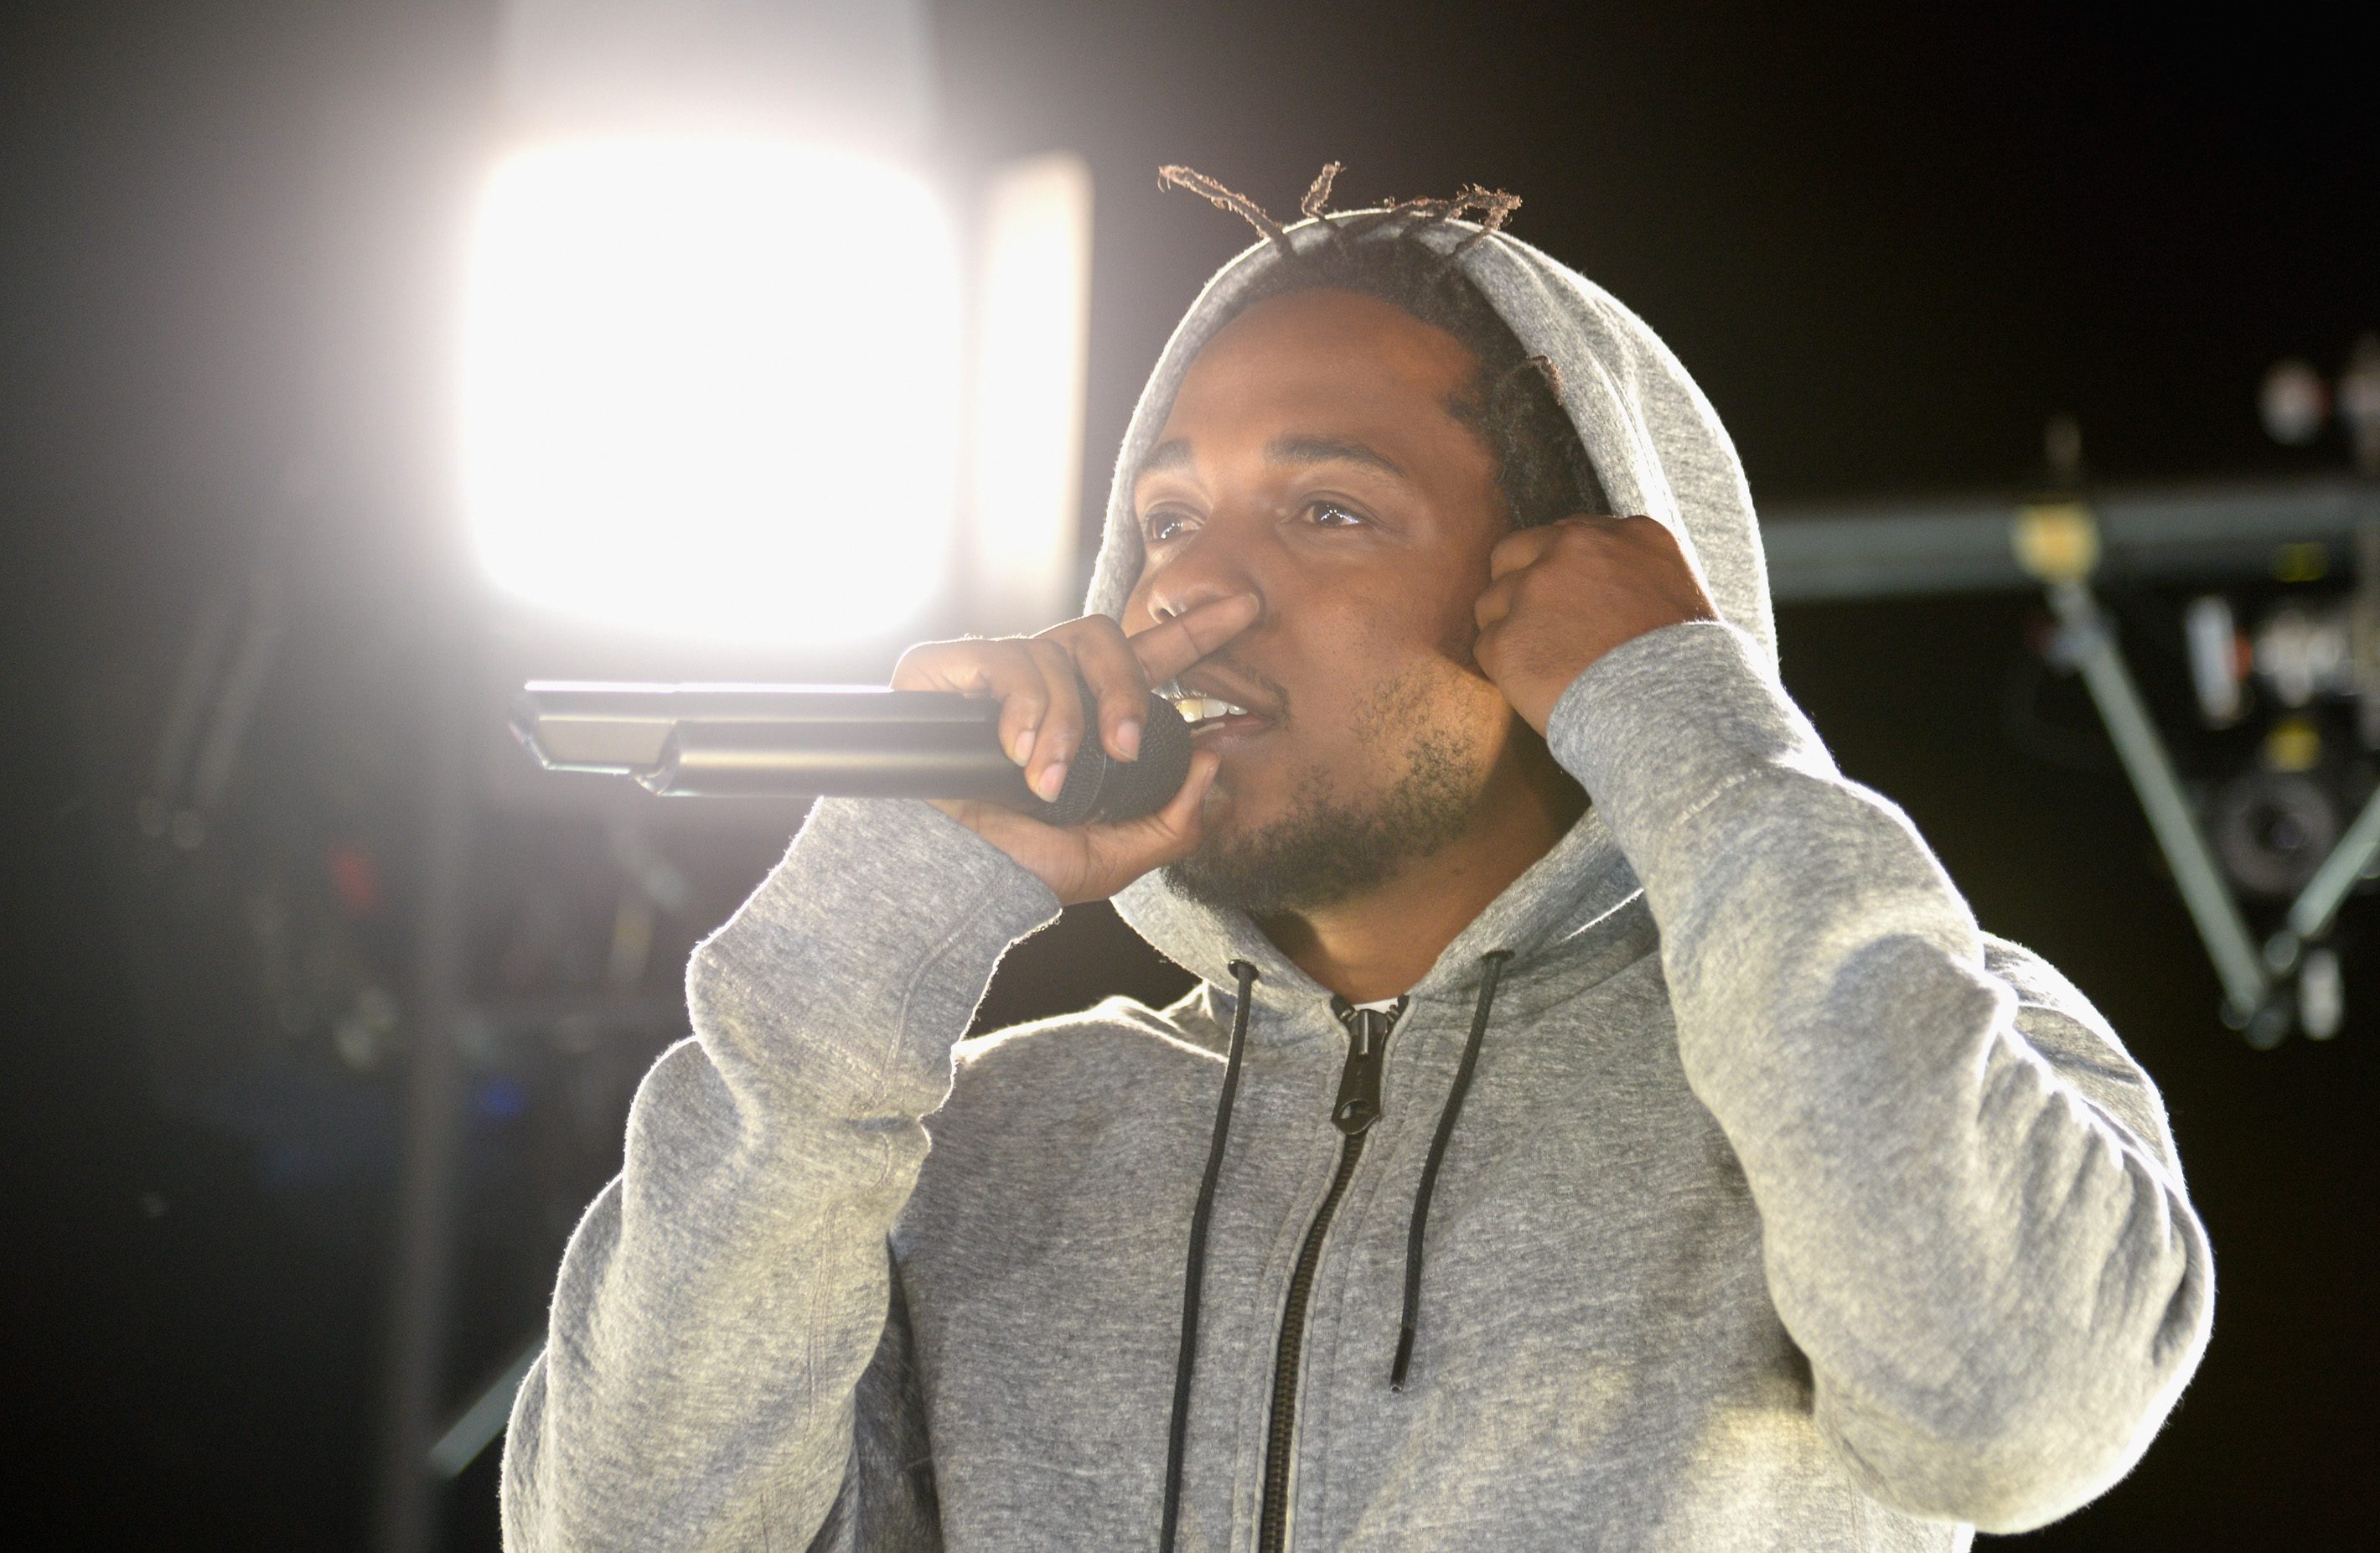 Reebok And Kendrick Lamar Take Over The Streets Of Hollywood With #GETPUMPED, Fusing Fitness And Music With A Ground-Breaking Live Event